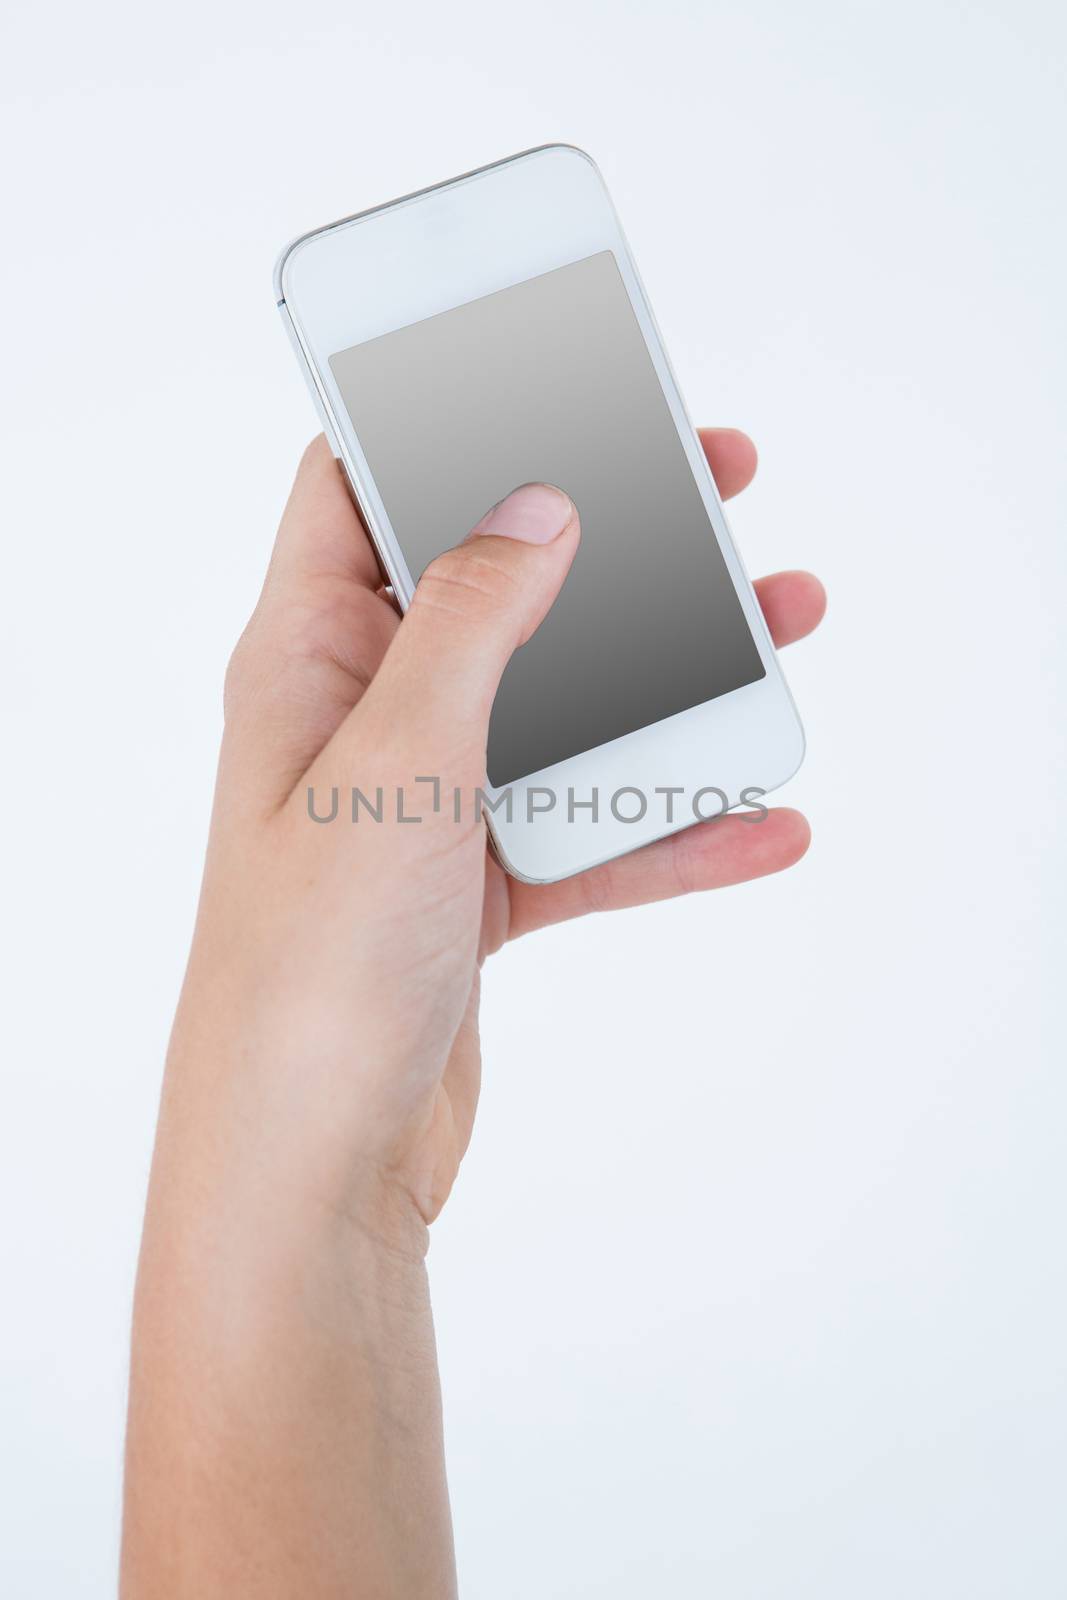 Hand showing smartphone on white background